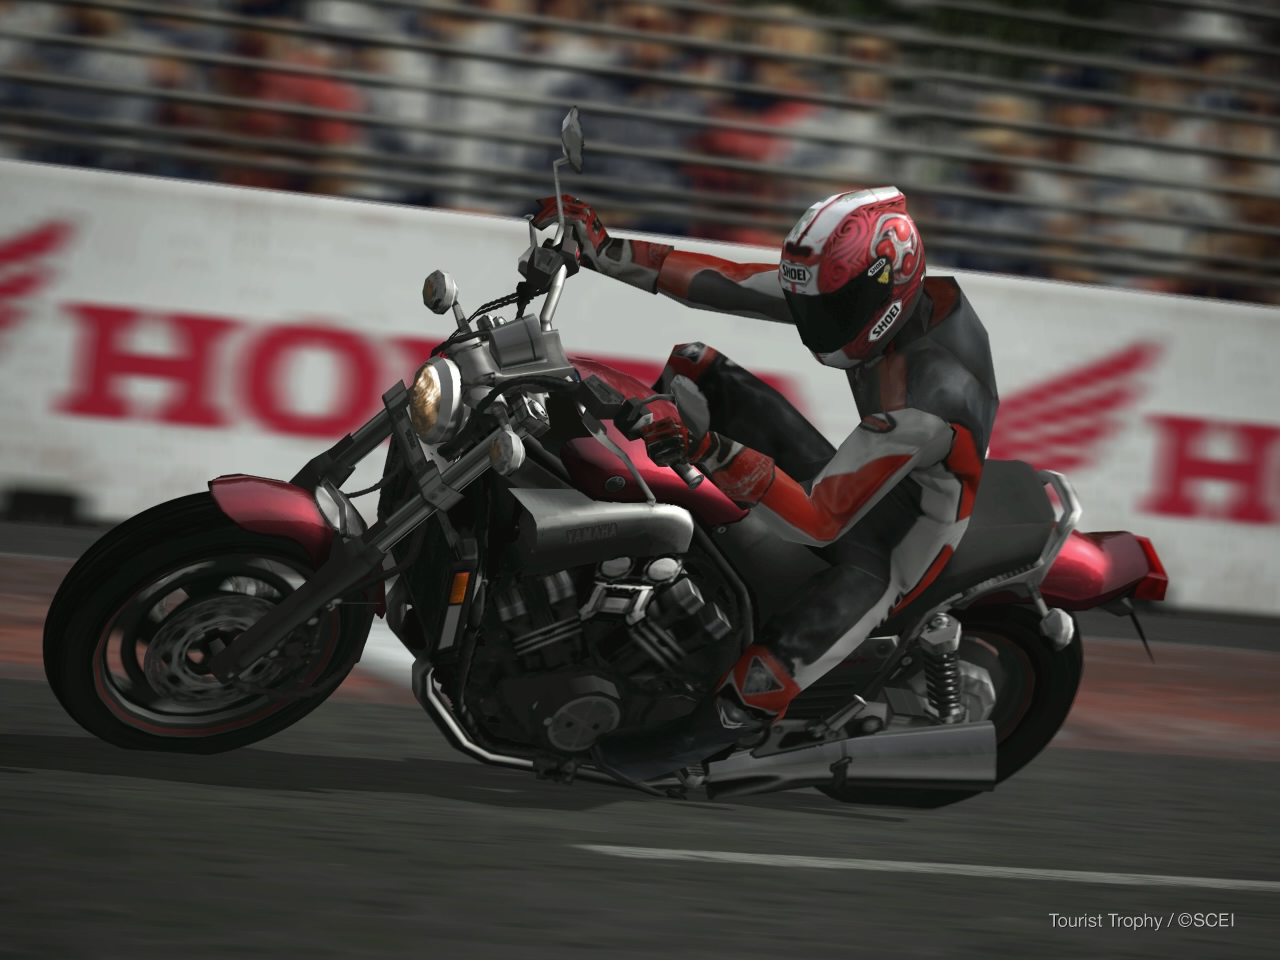 tourist trophy ps2 rom torrent